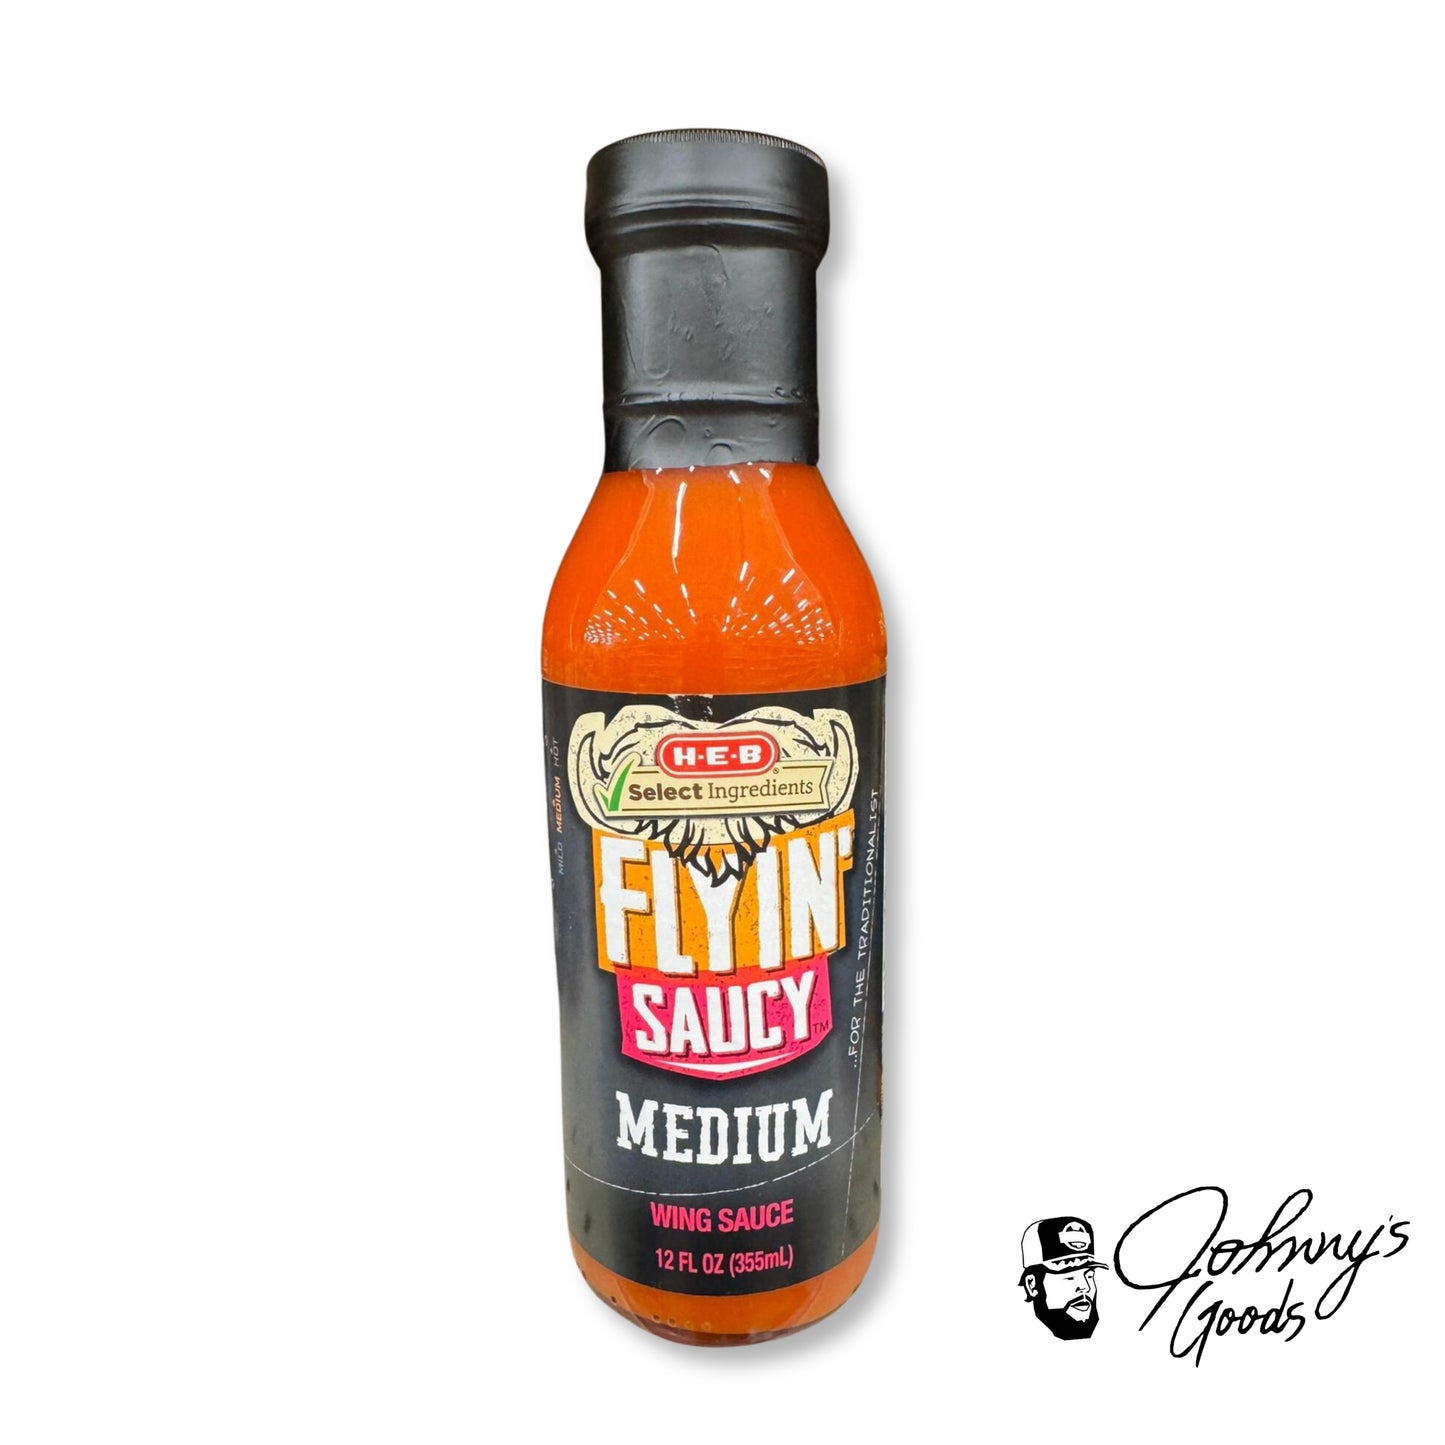 HEB Flyin' Saucy Wing Sauce h-e-b texas sauces medium heat wing sauces condiments flavors wings